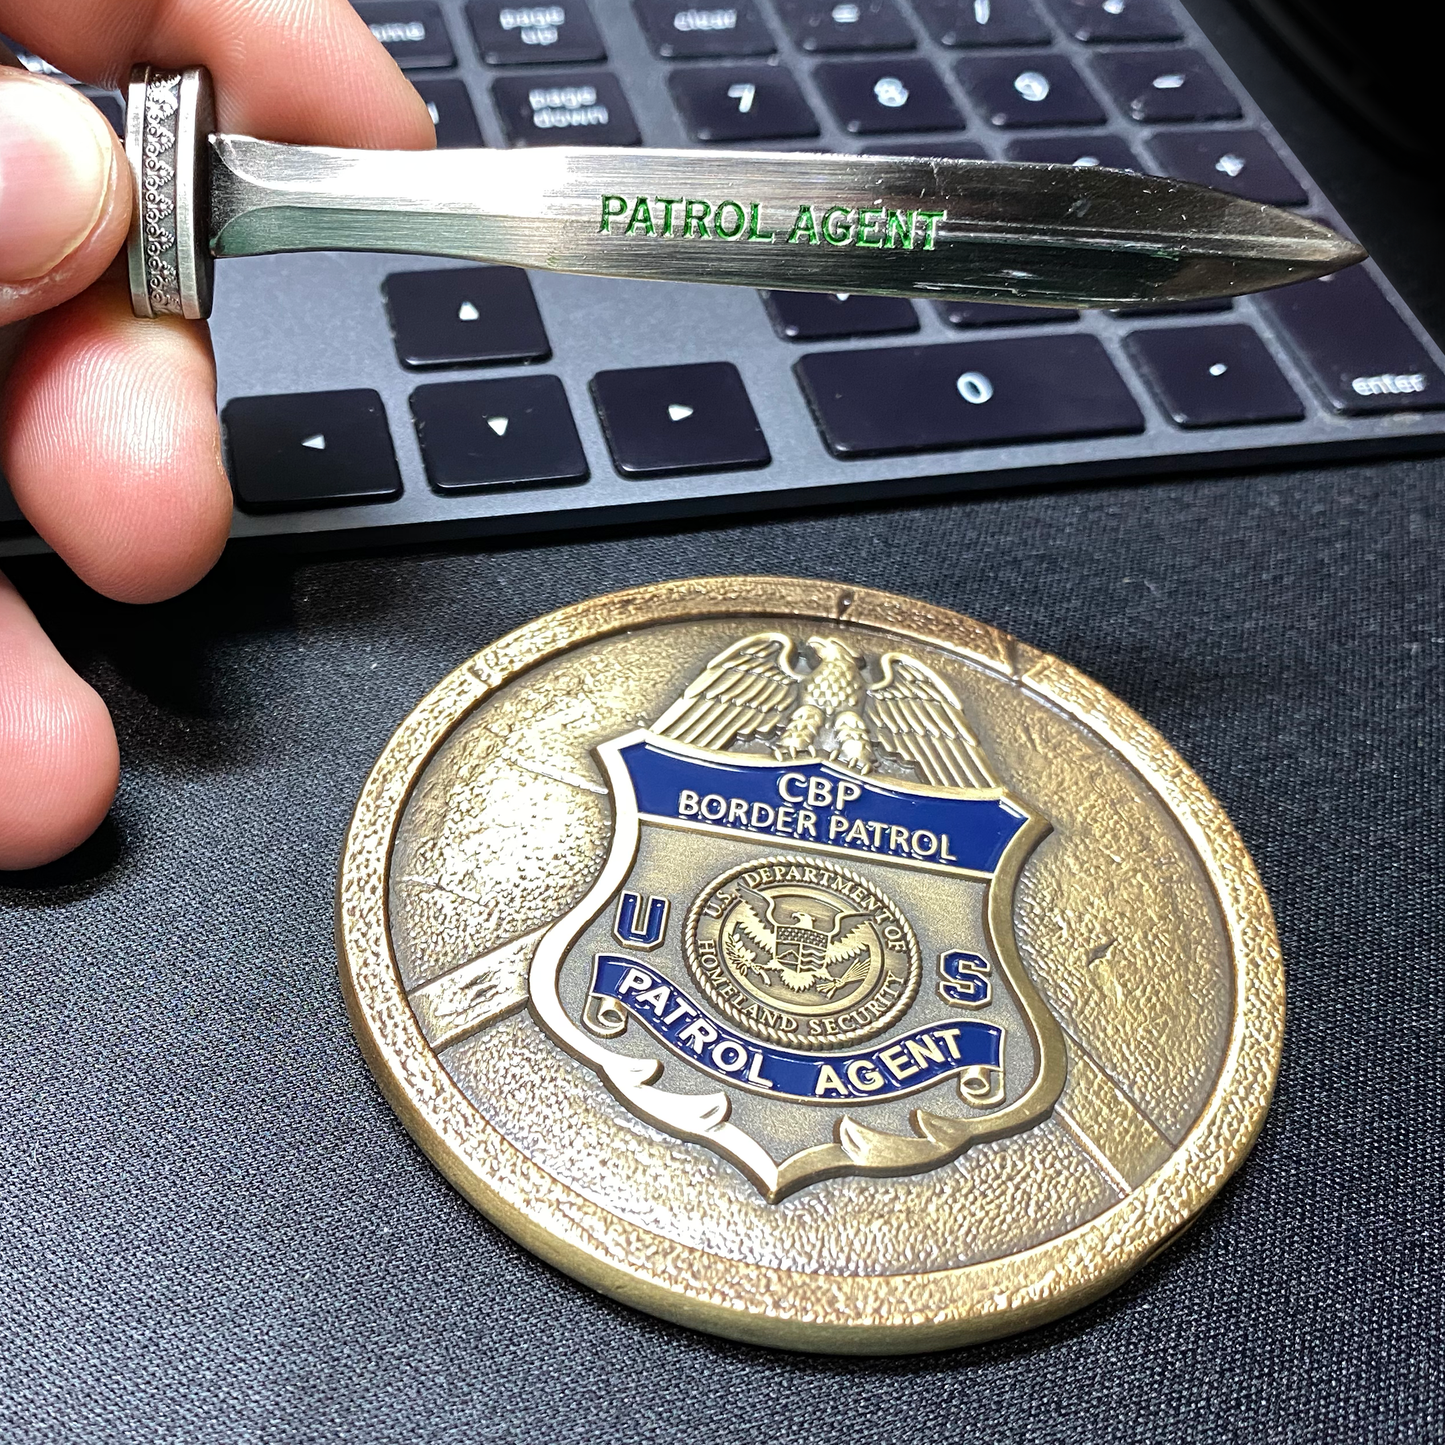 CL14-08 Border Patrol Agent CBP Honor First Shield with removable Sword Challenge Coin Set BPA